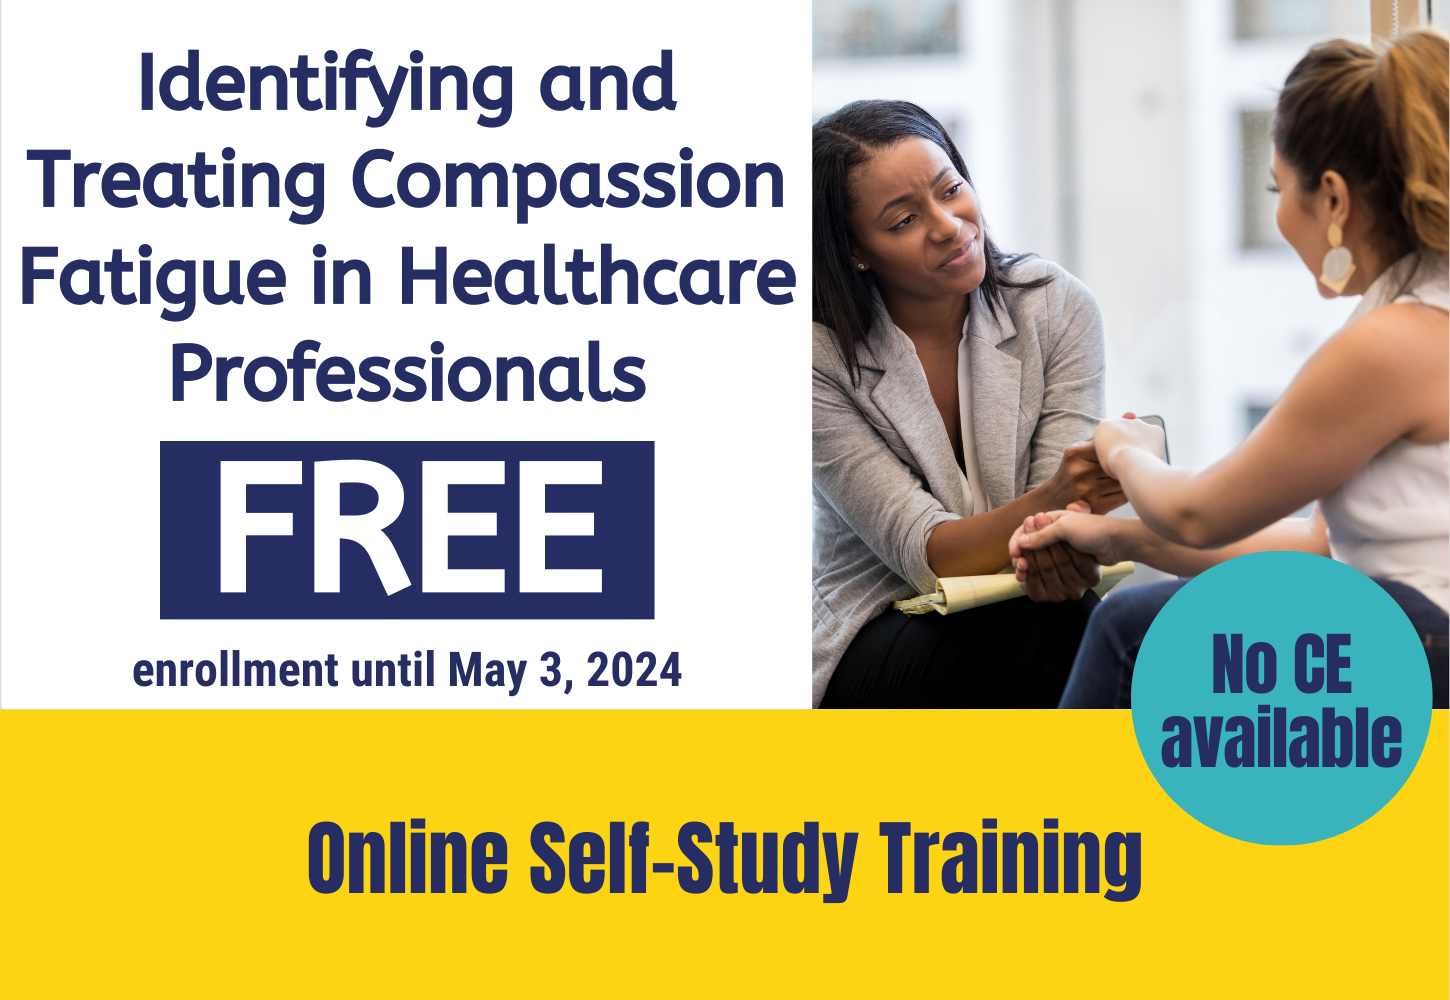 Identifying and Treating Compassion Fatigue in Healthcare Professionals